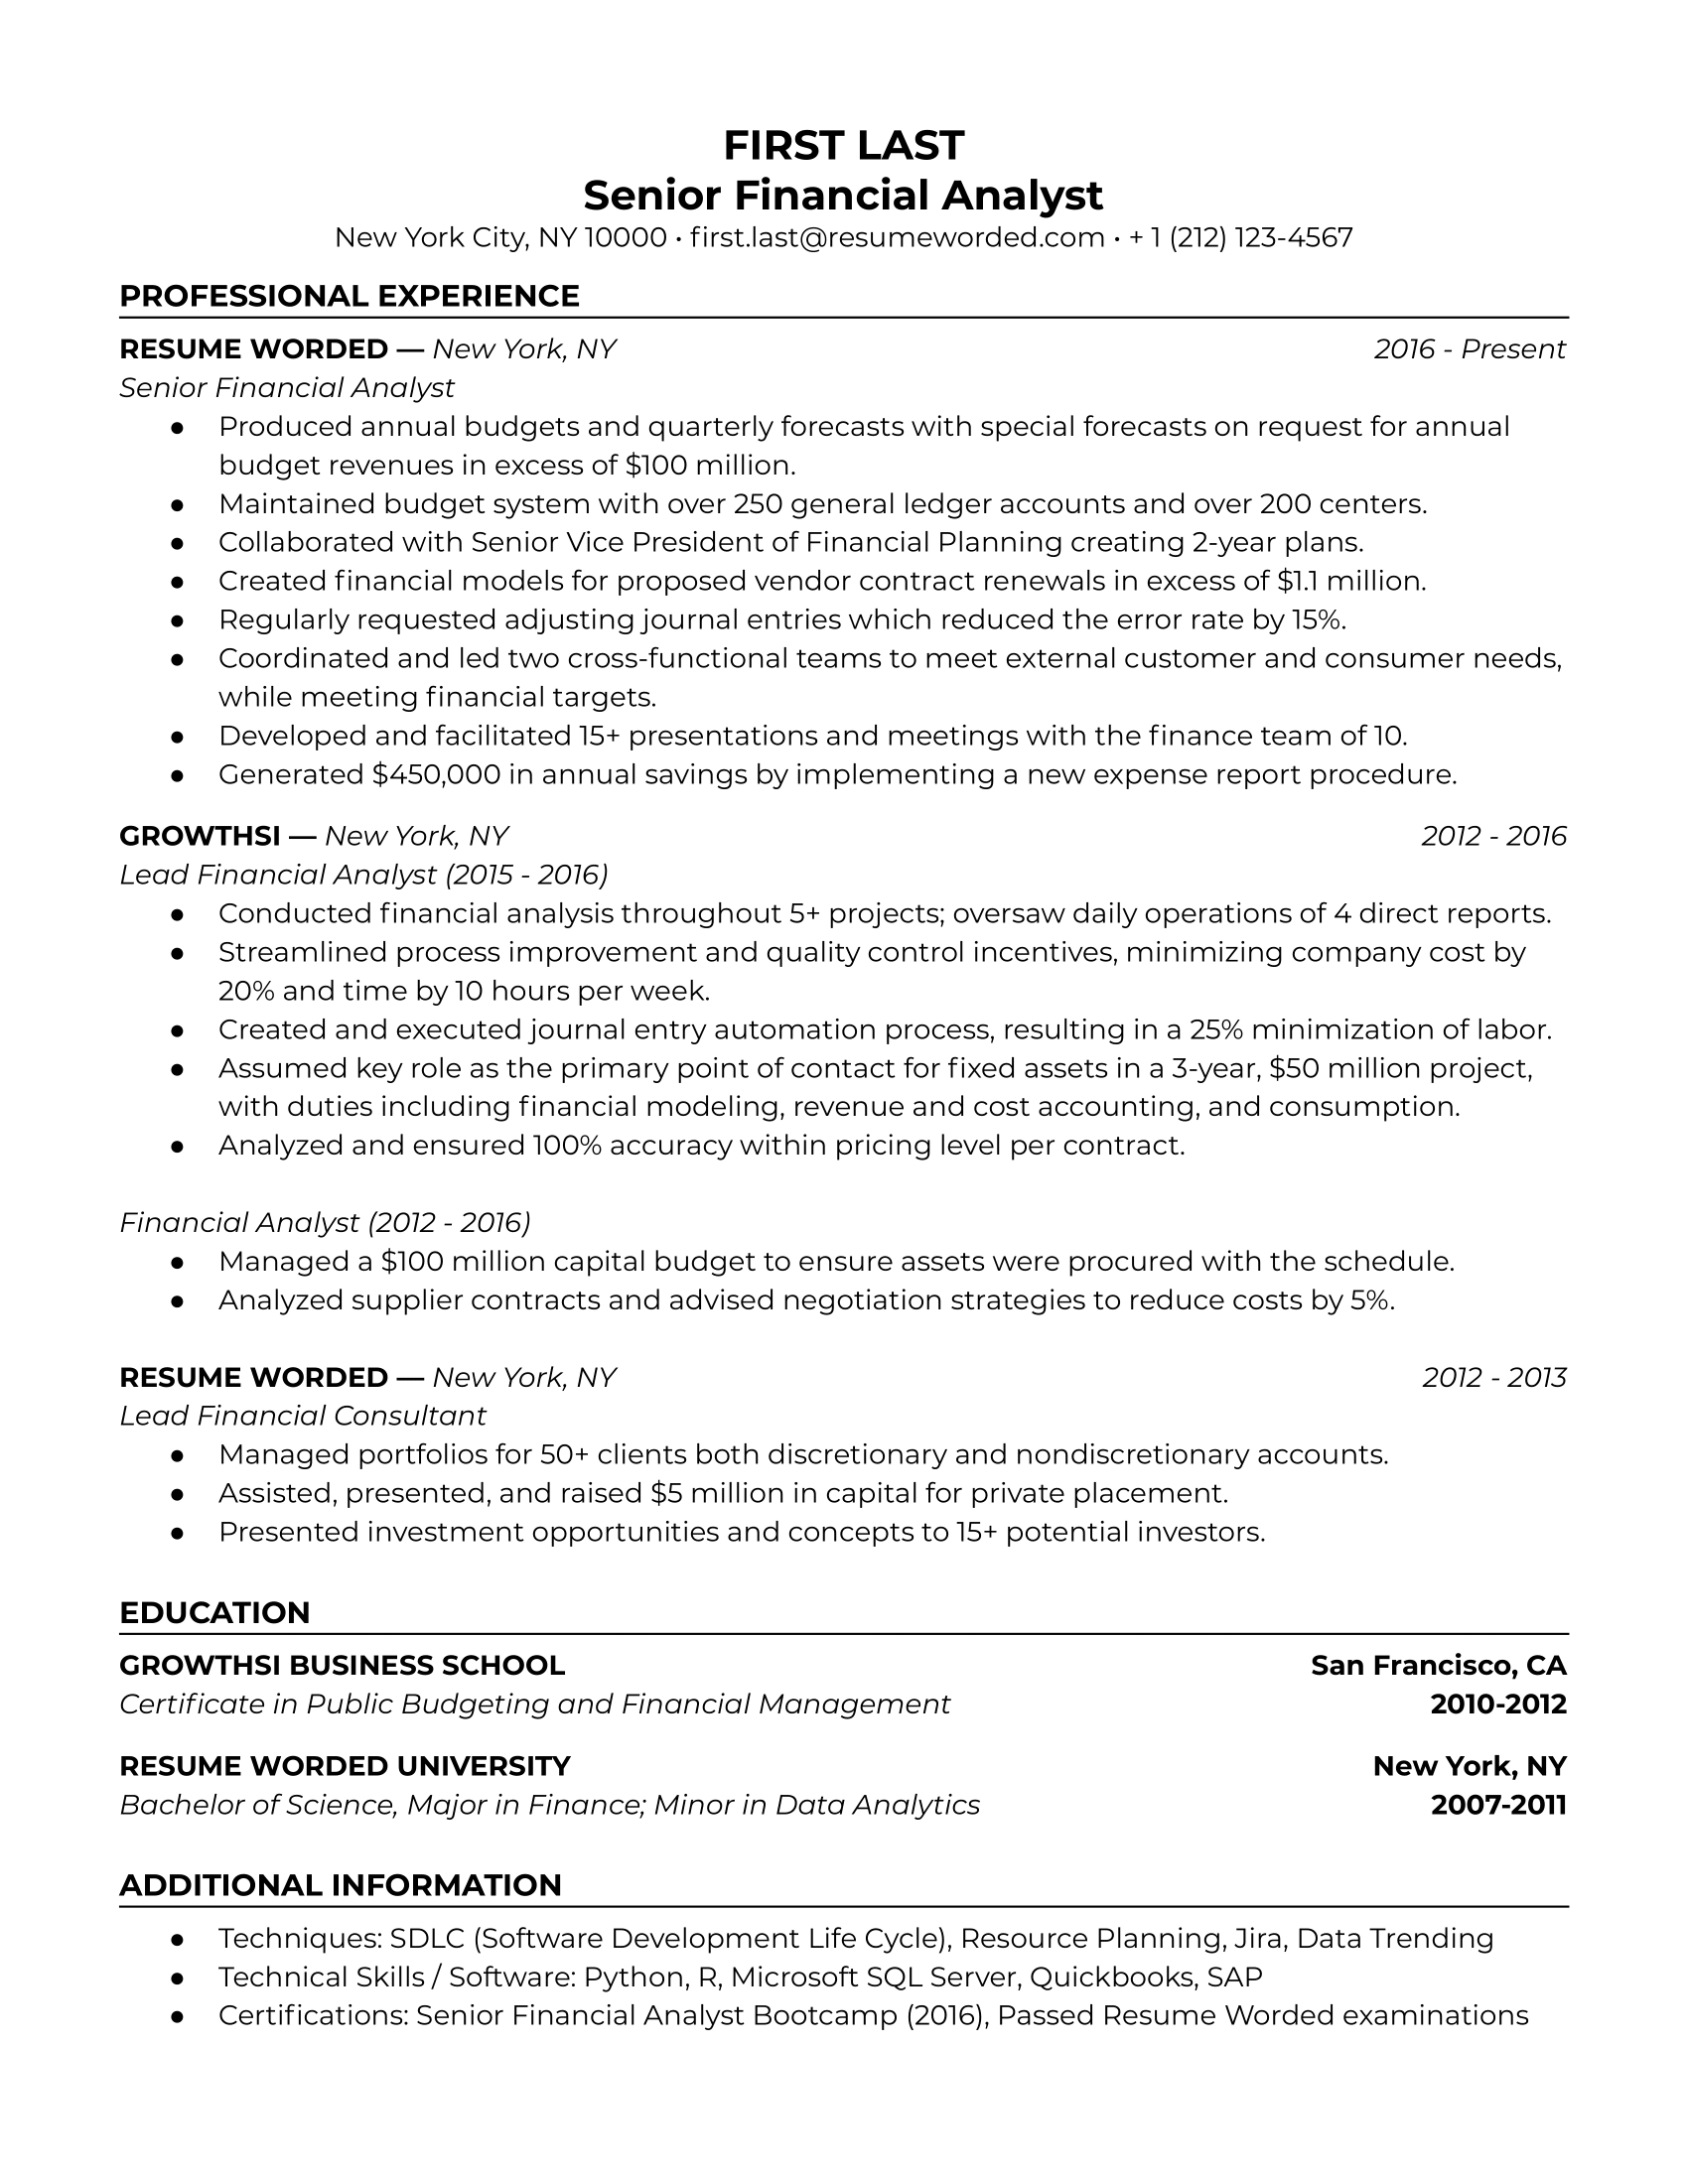 A resume for a senior financial analyst with a bachelor's degree in finance and prior experience as a lead financial consultant.